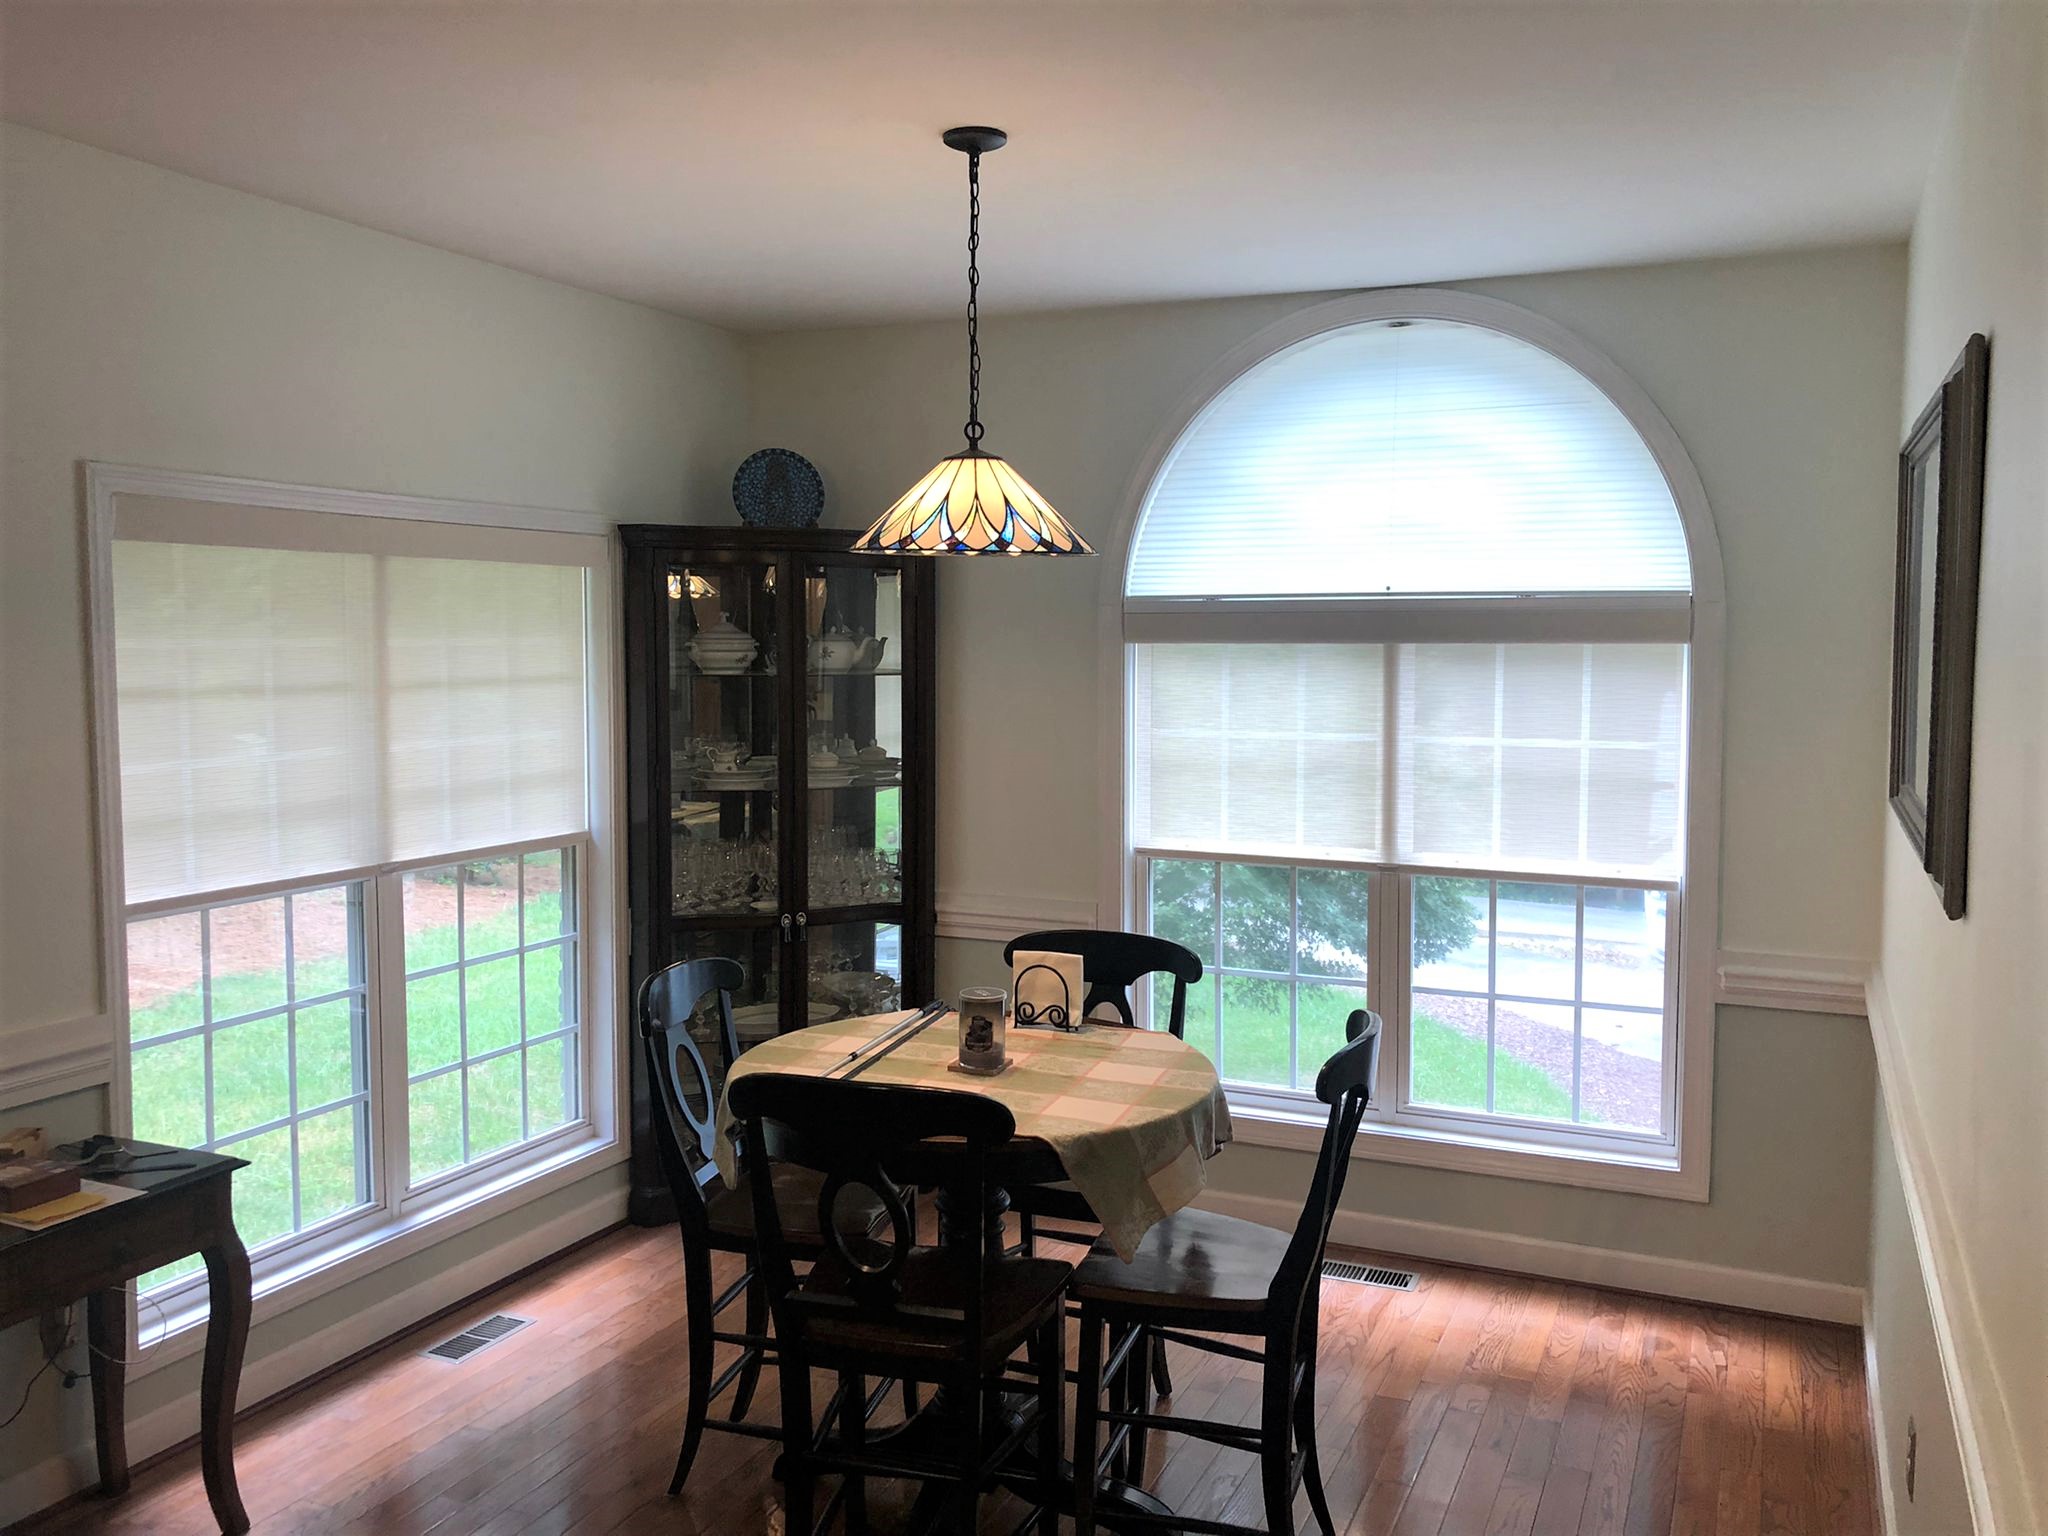 Another professional install by Budget Blinds of Duluth. Timeless cordless roller shades in a local Snellville home.